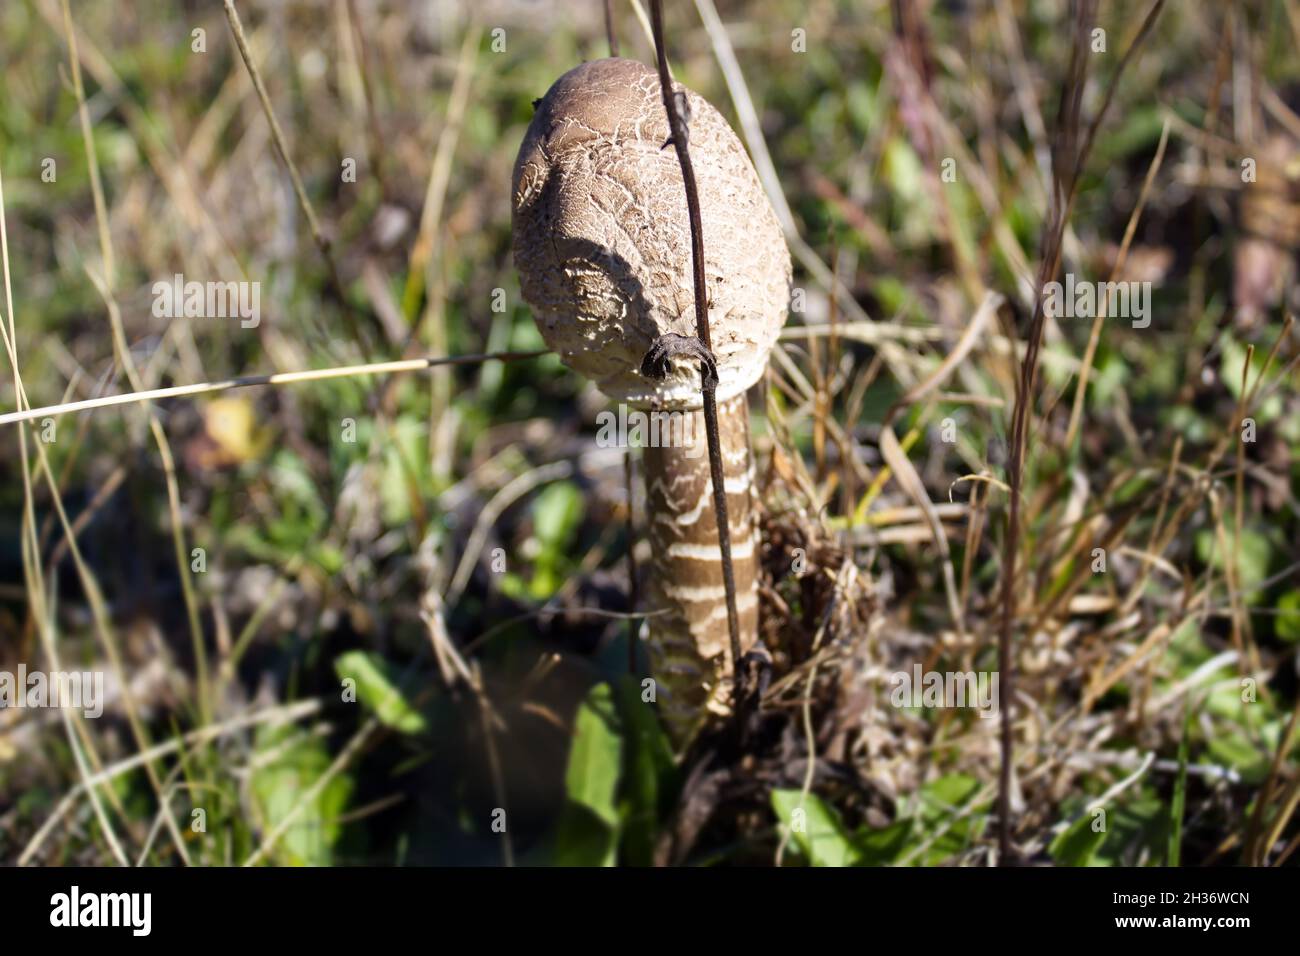 Closeup shot of a Slender Parasol mushroom growing in the woods Stock Photo